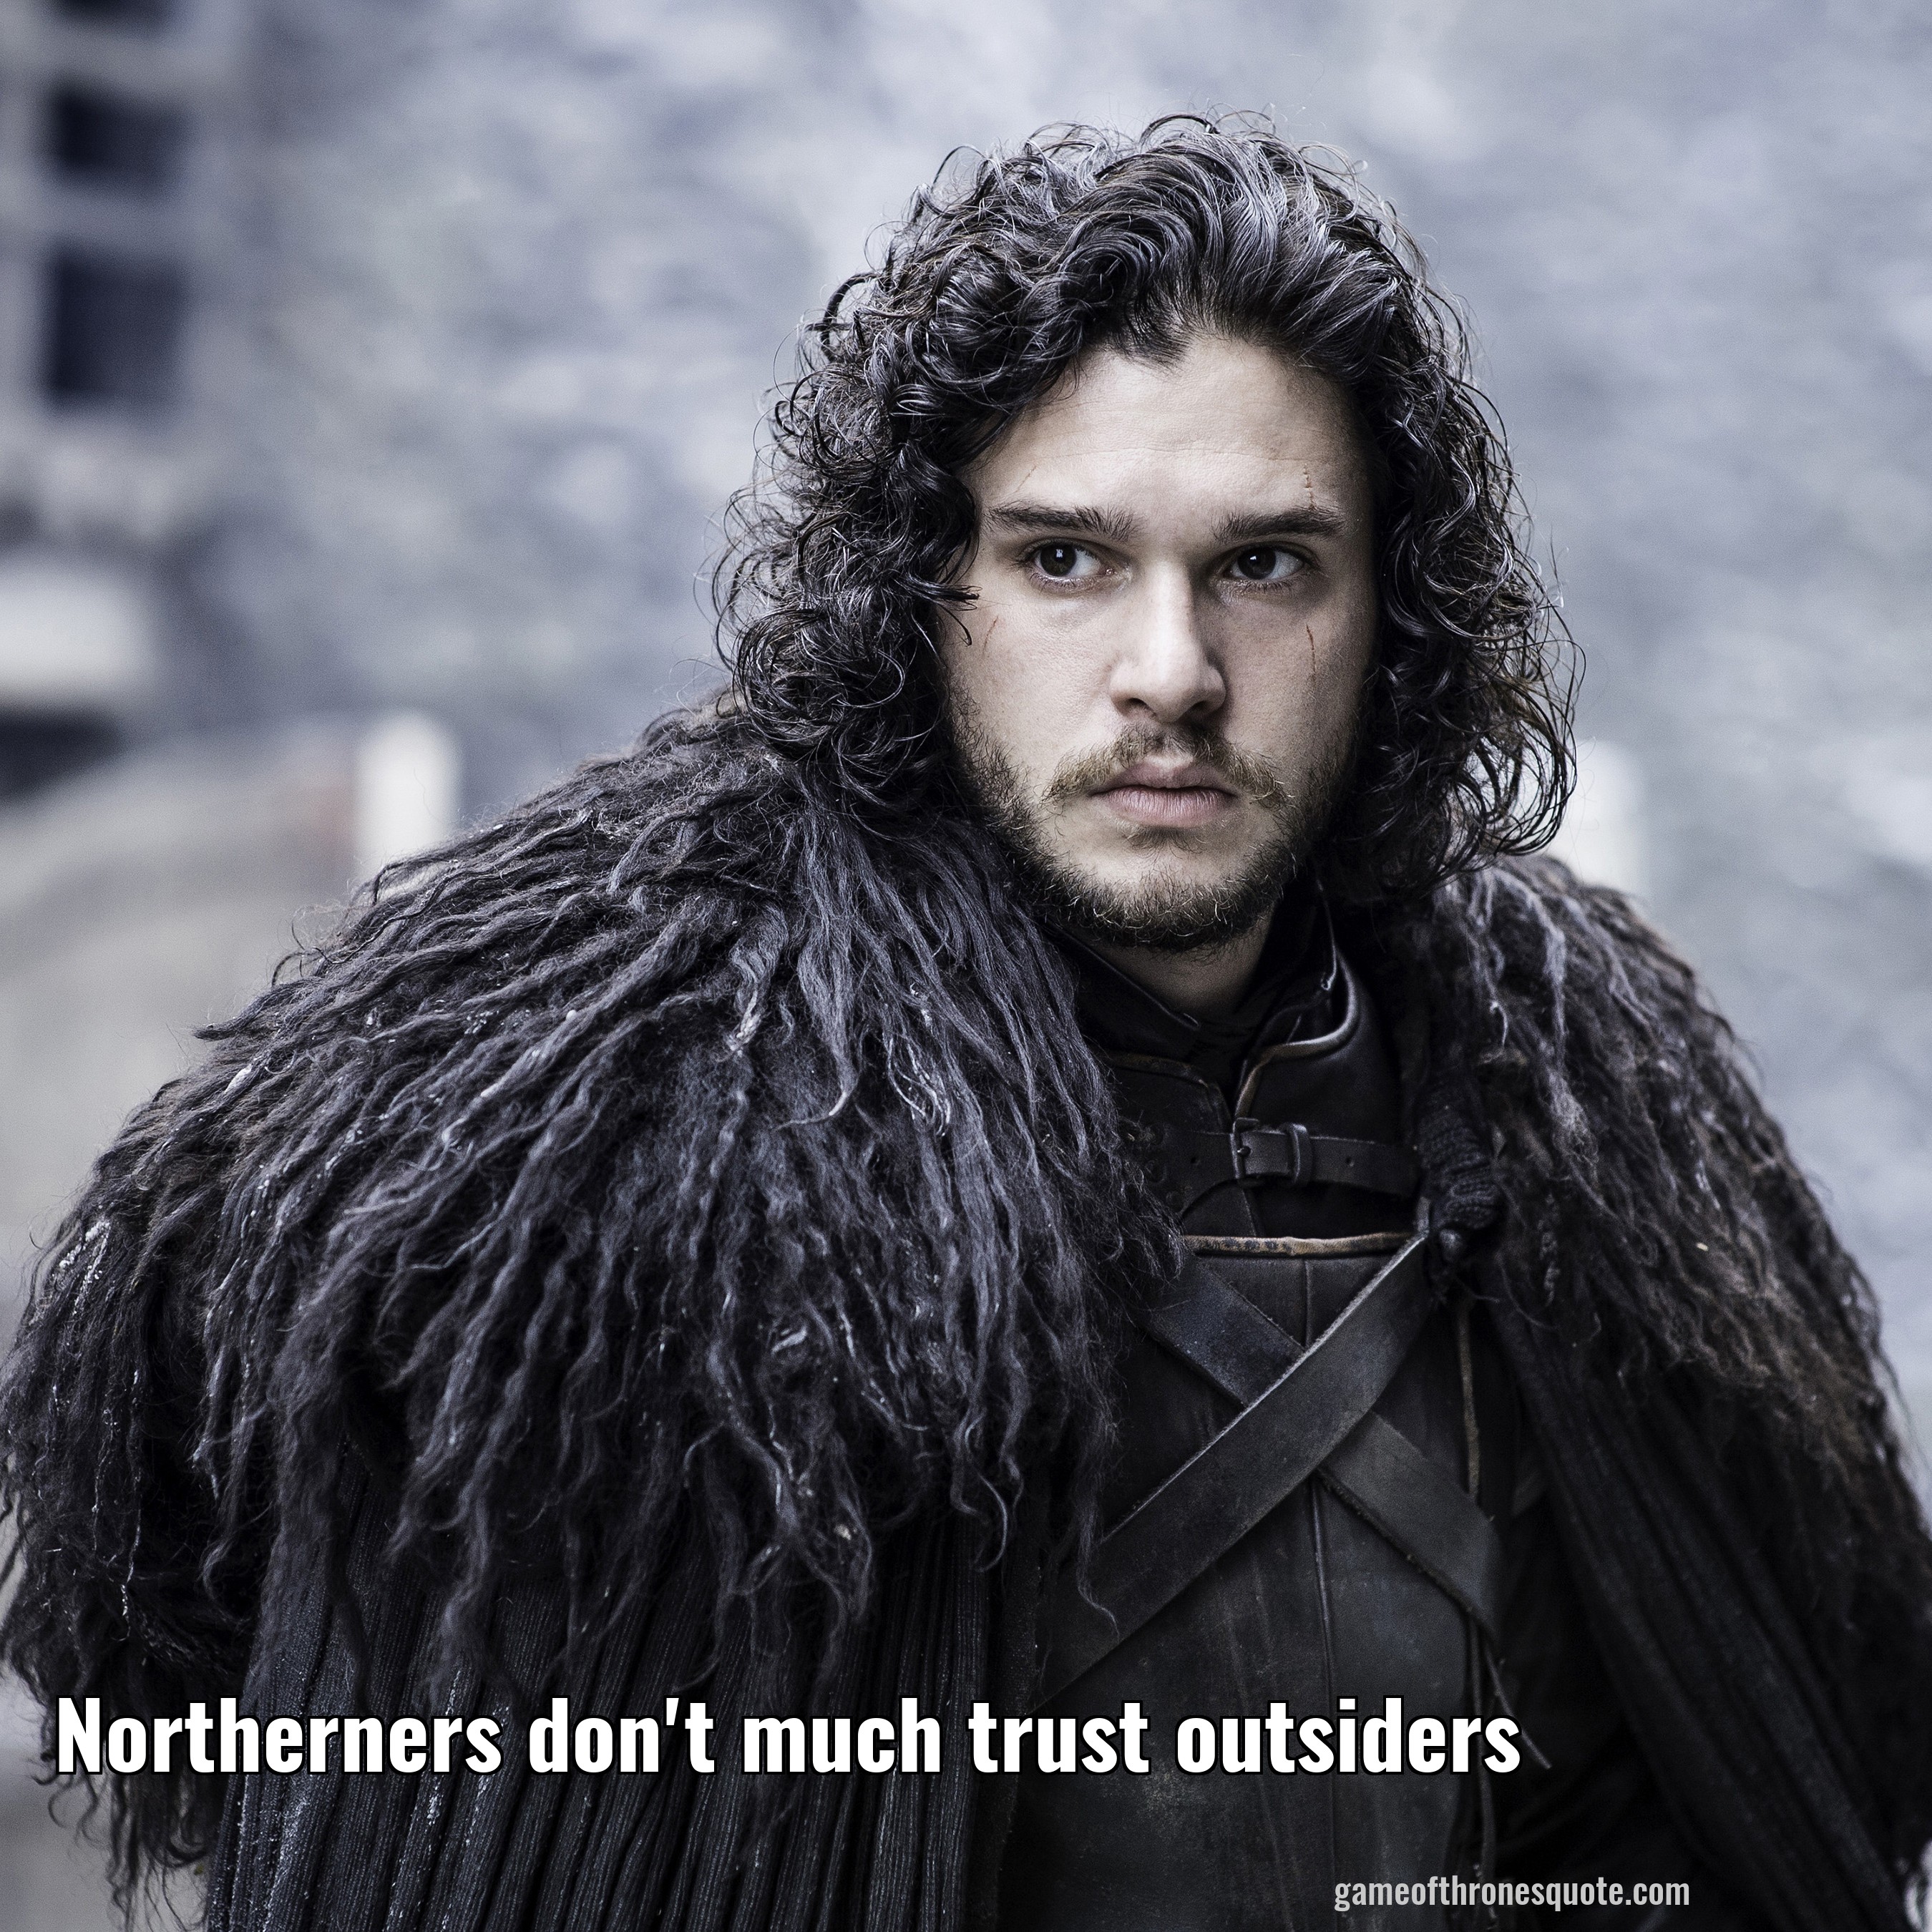 Northerners don't much trust outsiders